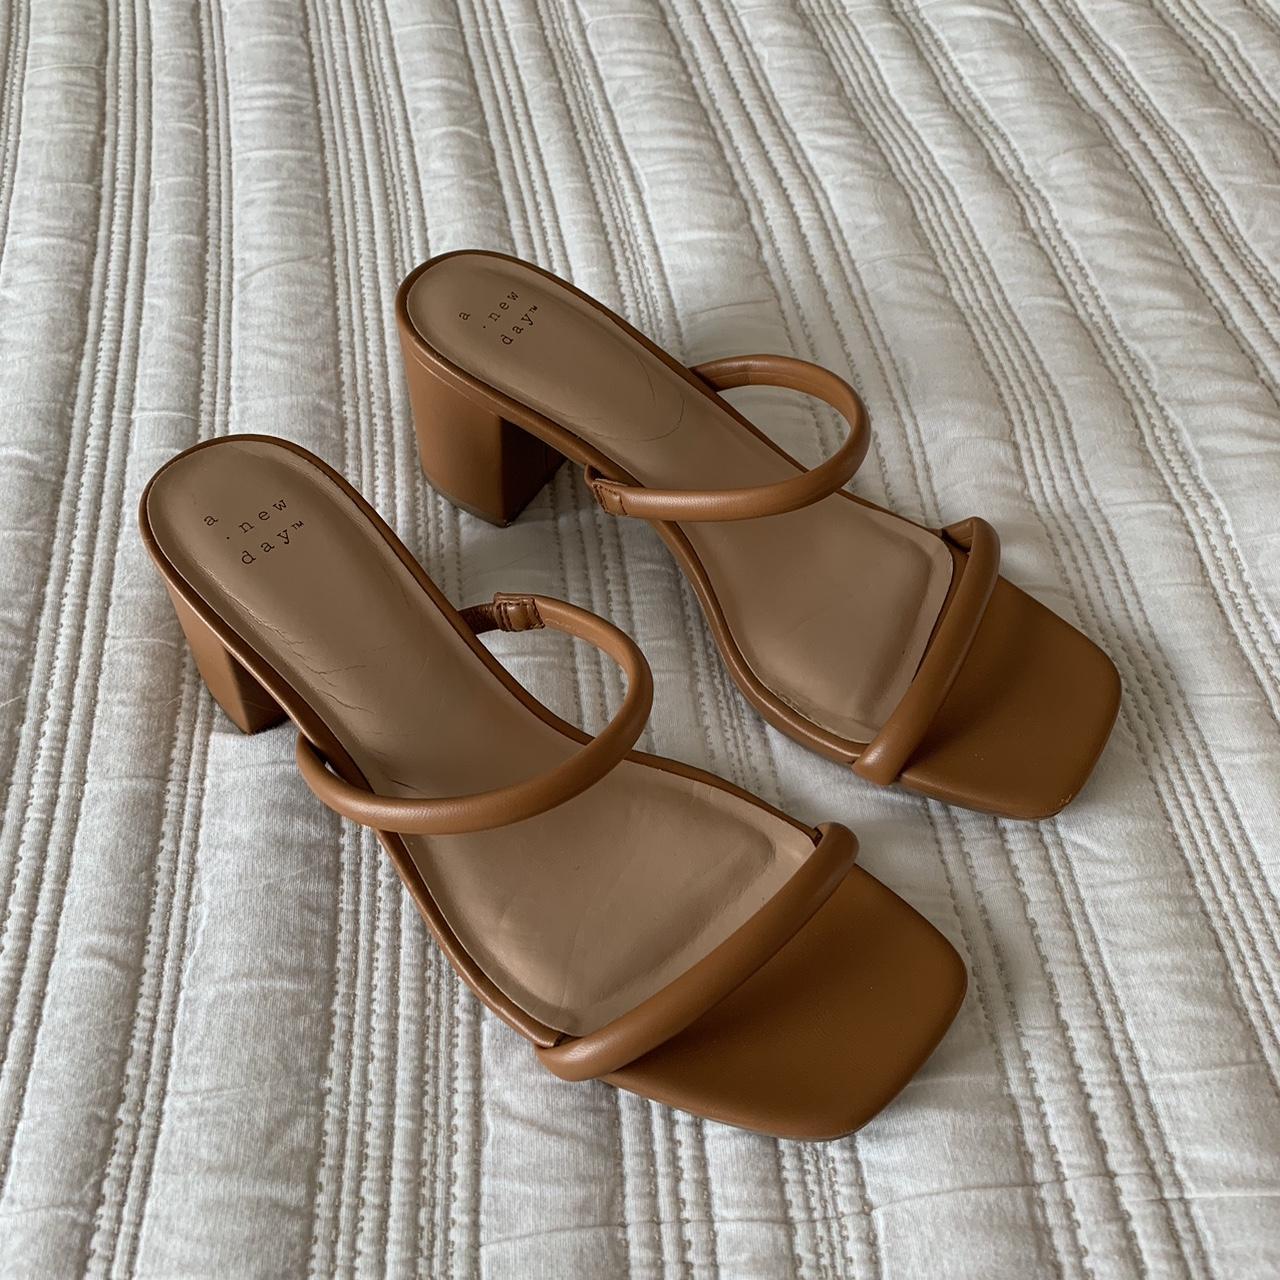 A New Day Women's Tan and Brown Sandals